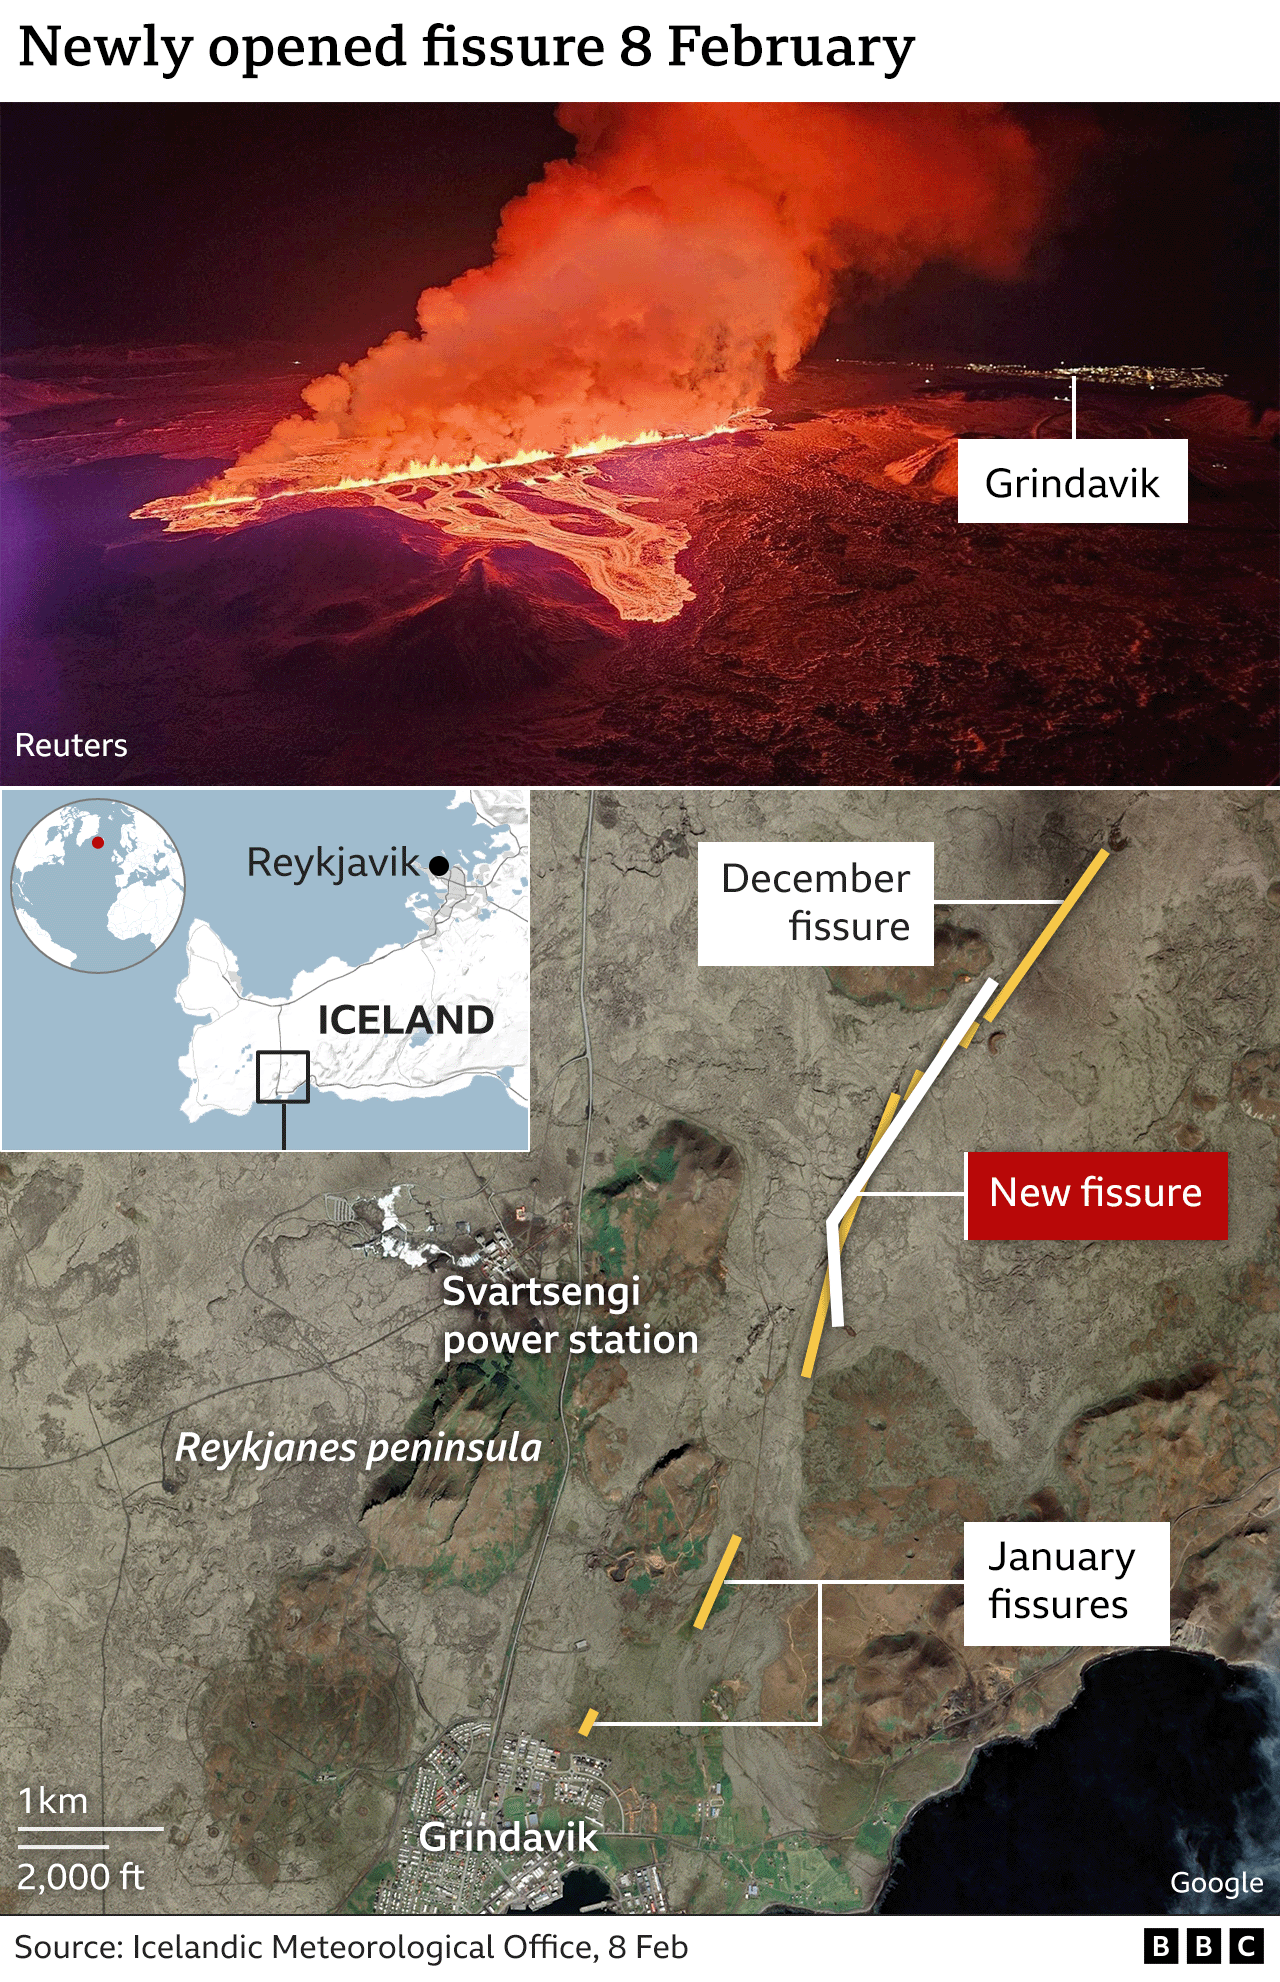 A BBC composite graphic with a satellite image and an aerial image illustrating how new fissures opened up on Iceland's Reykjanes peninsula in December and January